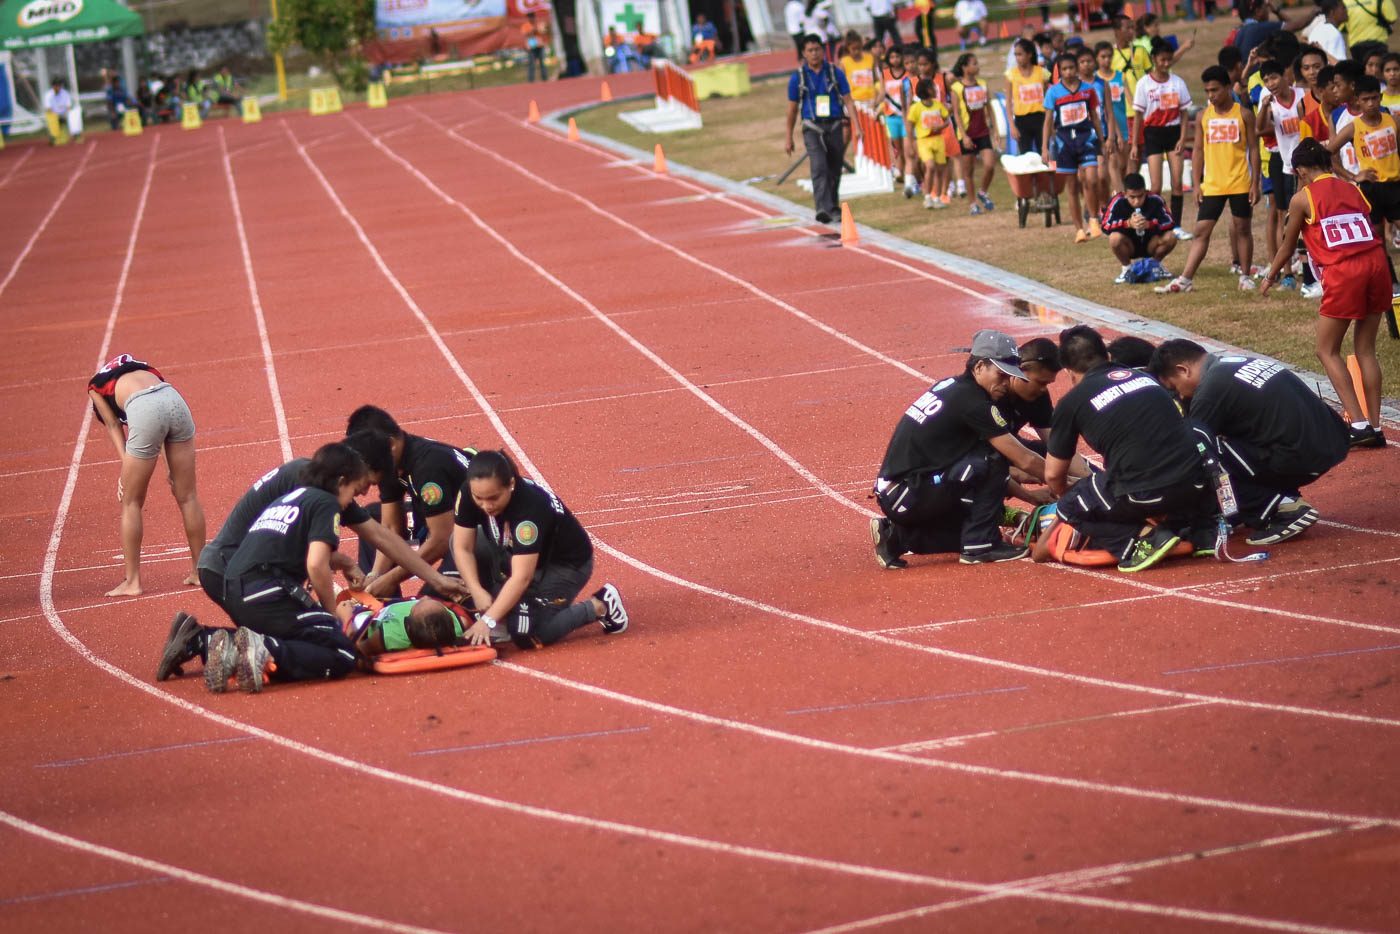 MORE INJURIES. Medical rescue teams attend to athletes collapsing at the finish line during the track and field event at the EBJ Sports Stadium in San Jose Buenavista. Photo by LeAnne Jazul/Rappler  